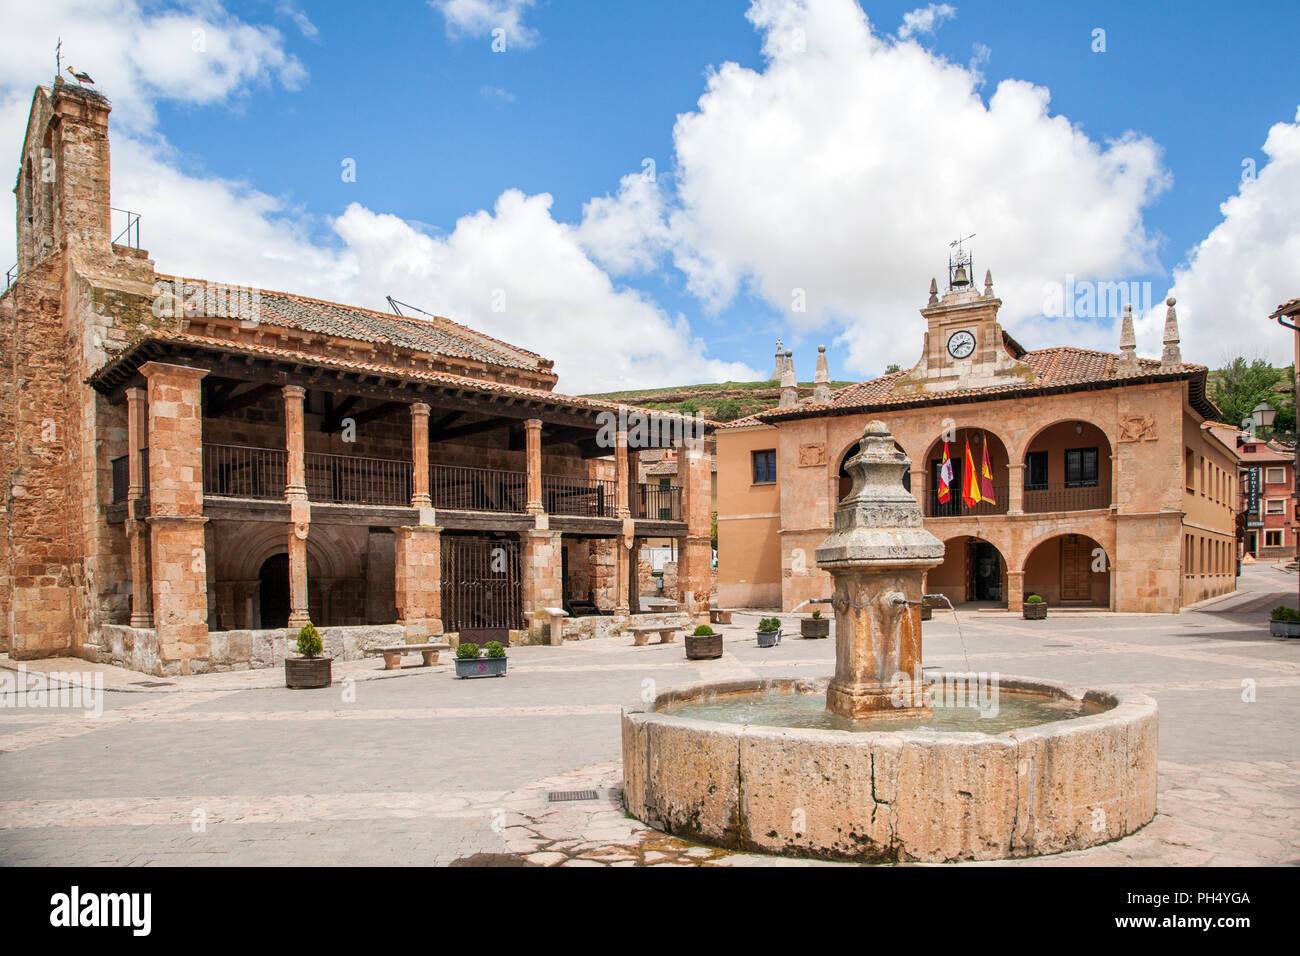 The Plaza Mayor in the Spanish town of Ayllon in the province of Segovia Castille y Leon Spain Stock Photo